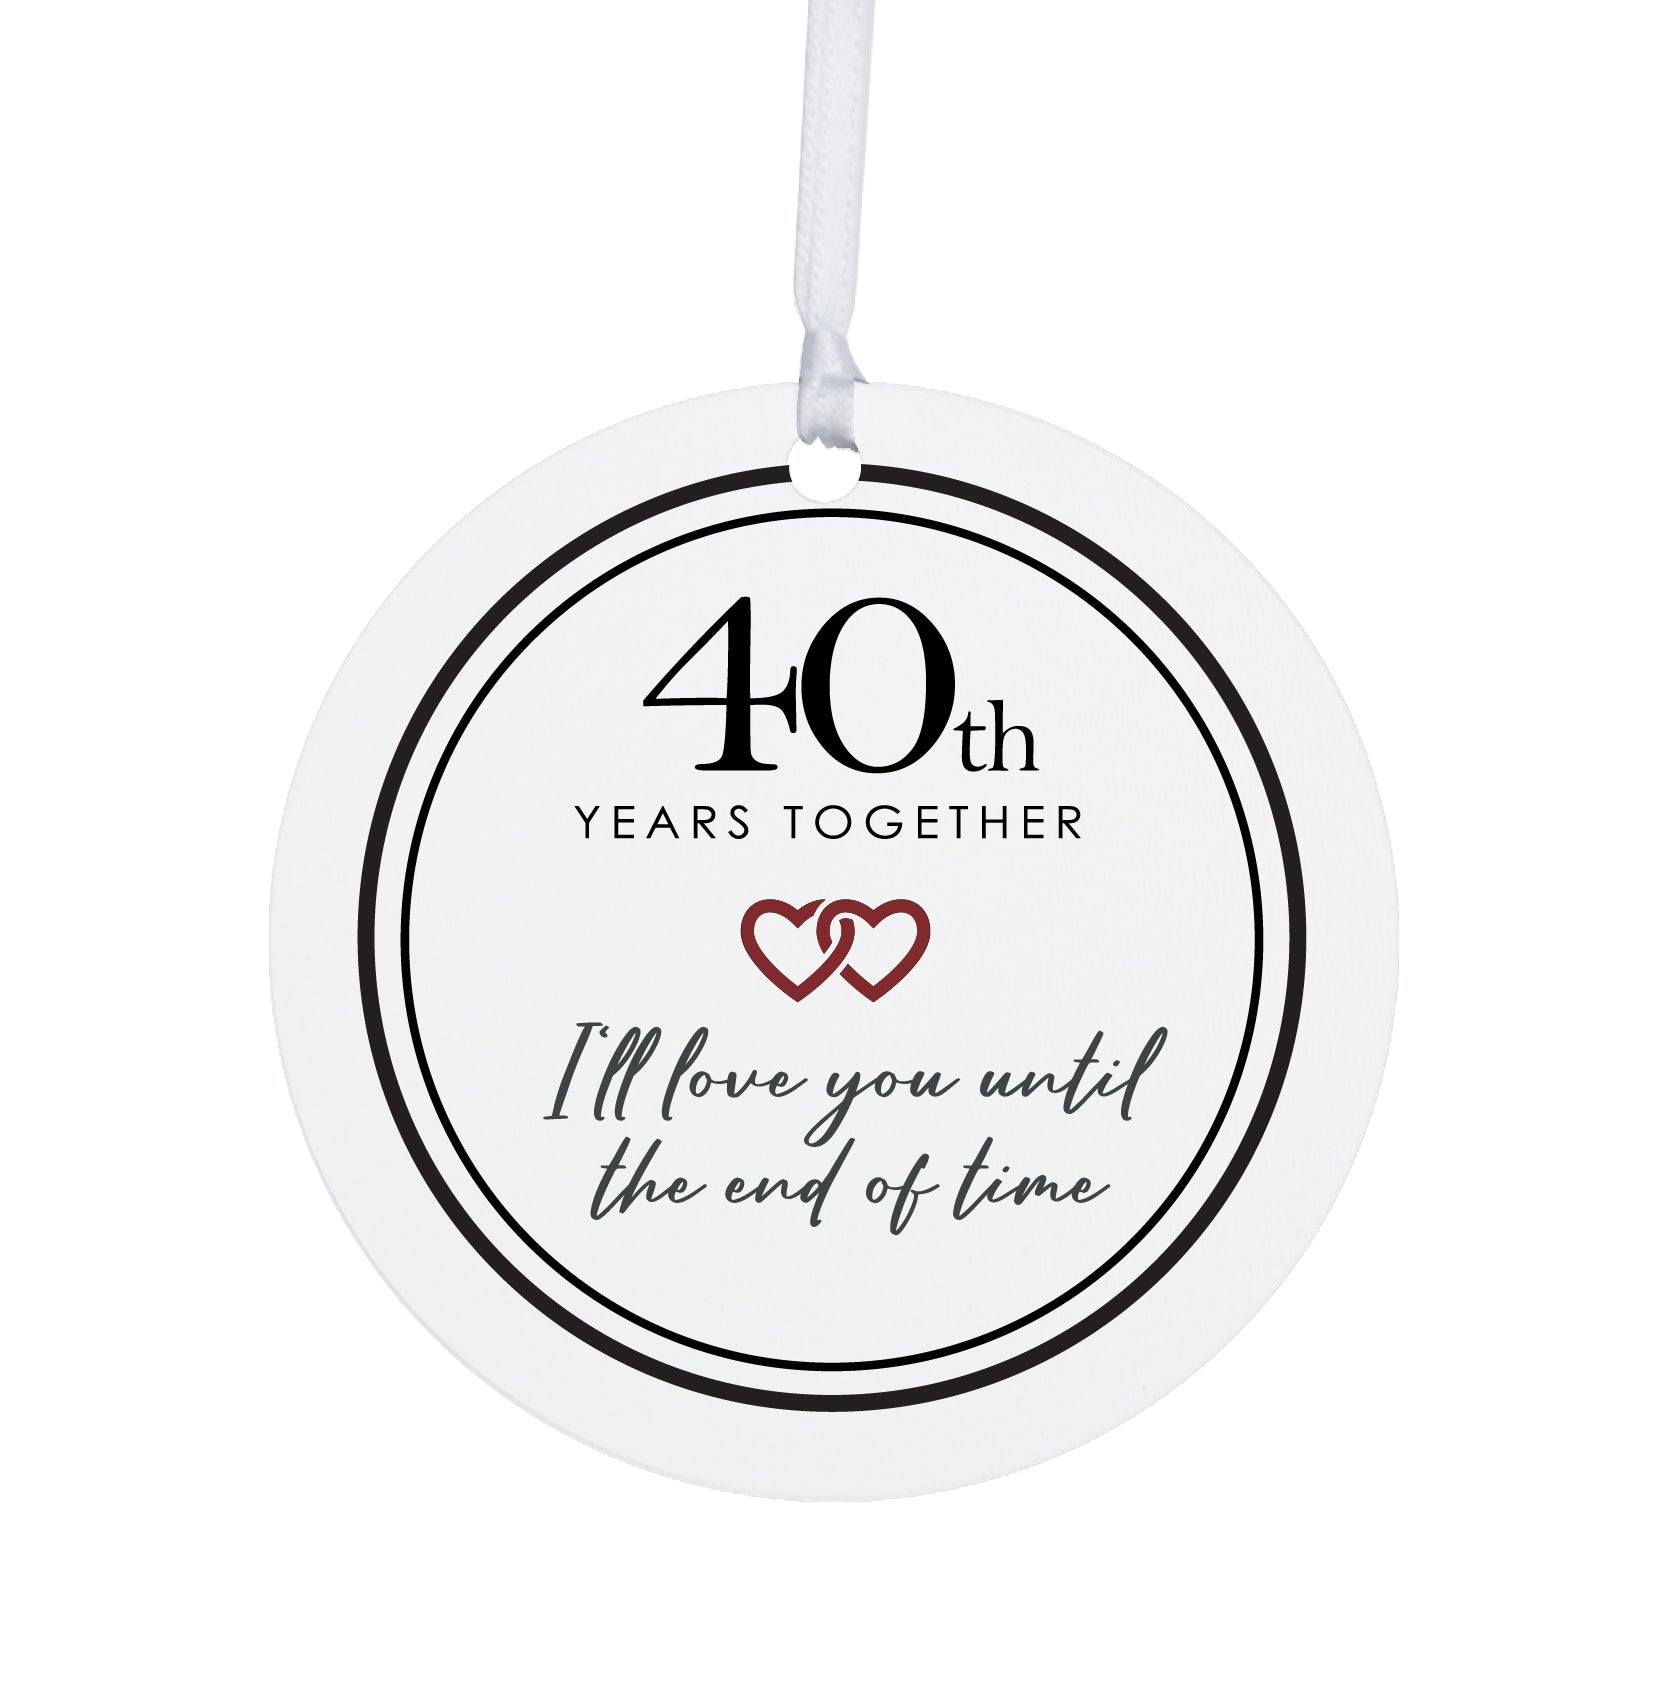 40 Years of Marriage - Happily Married Couple - 40th Wedding Anniversary  Gift